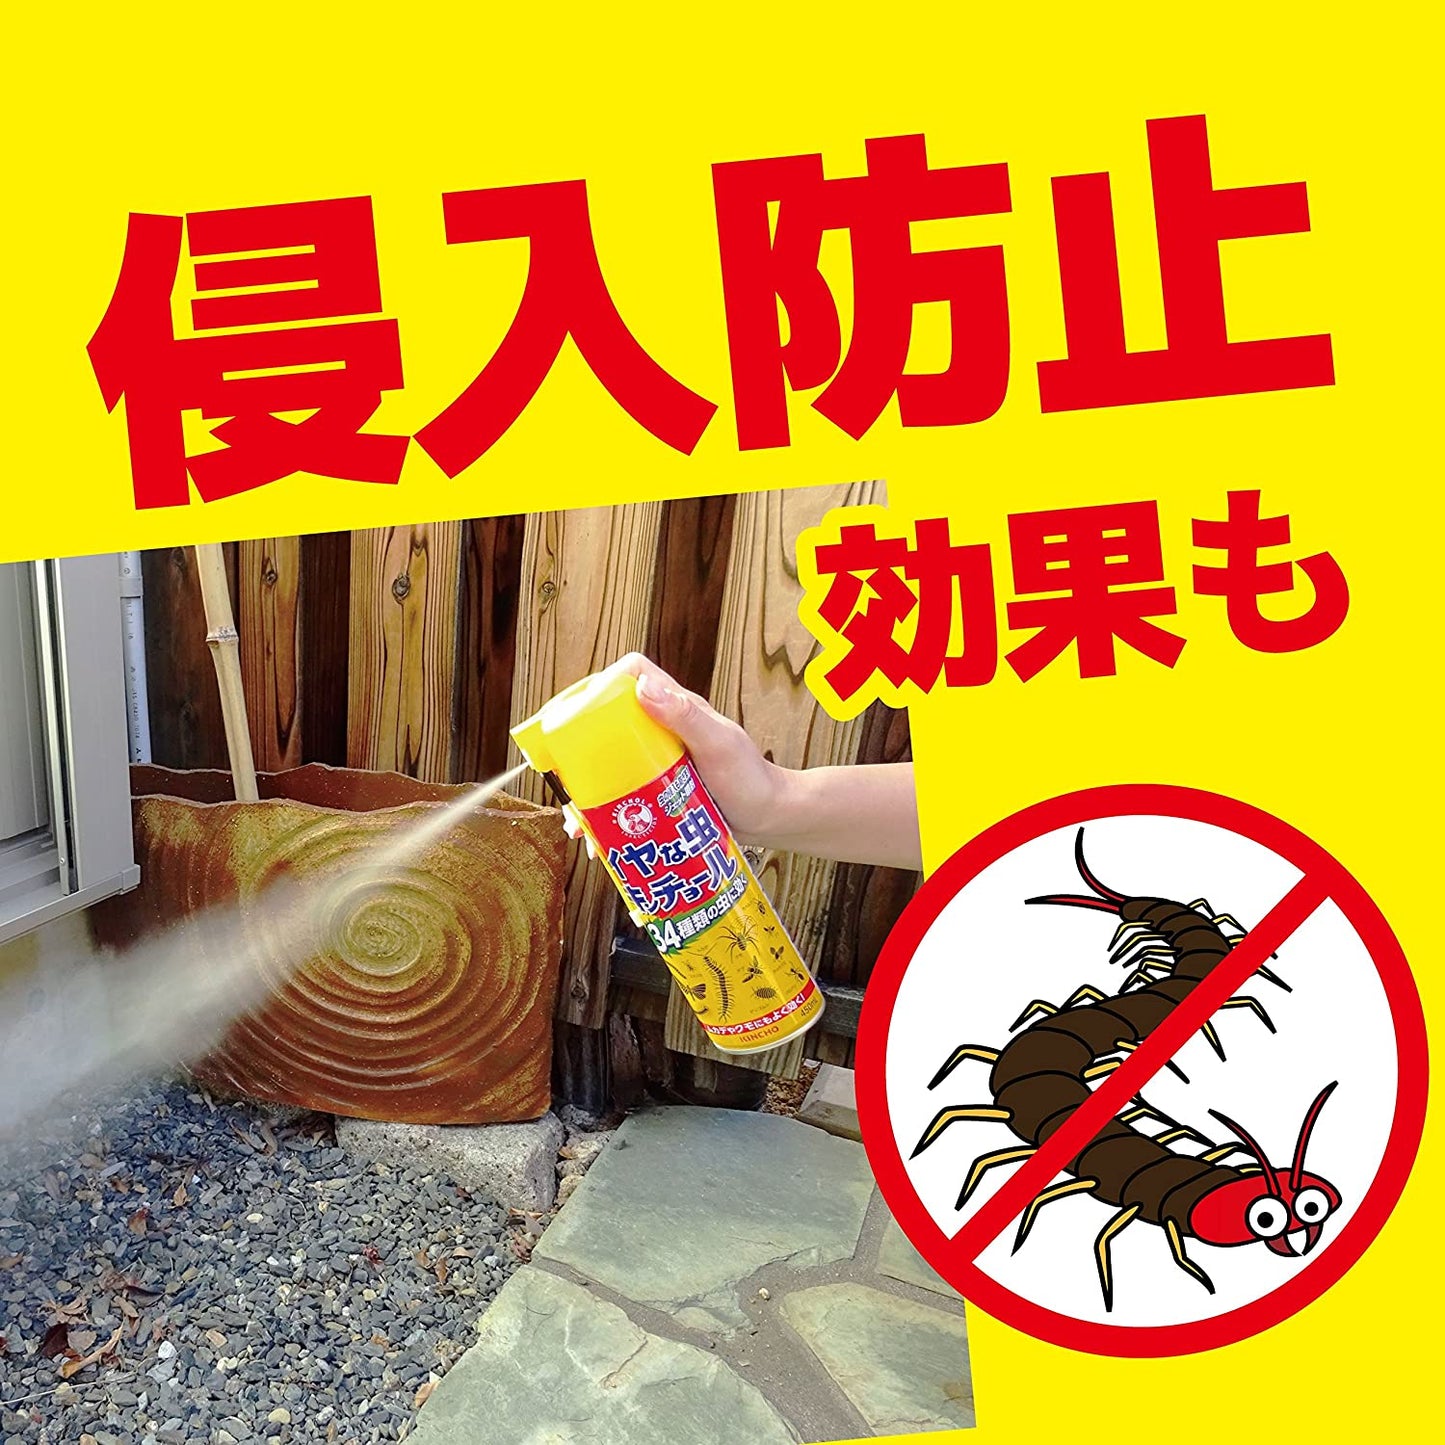 [6-PACK] KINCHO Japan Insecticidal spray 450ml